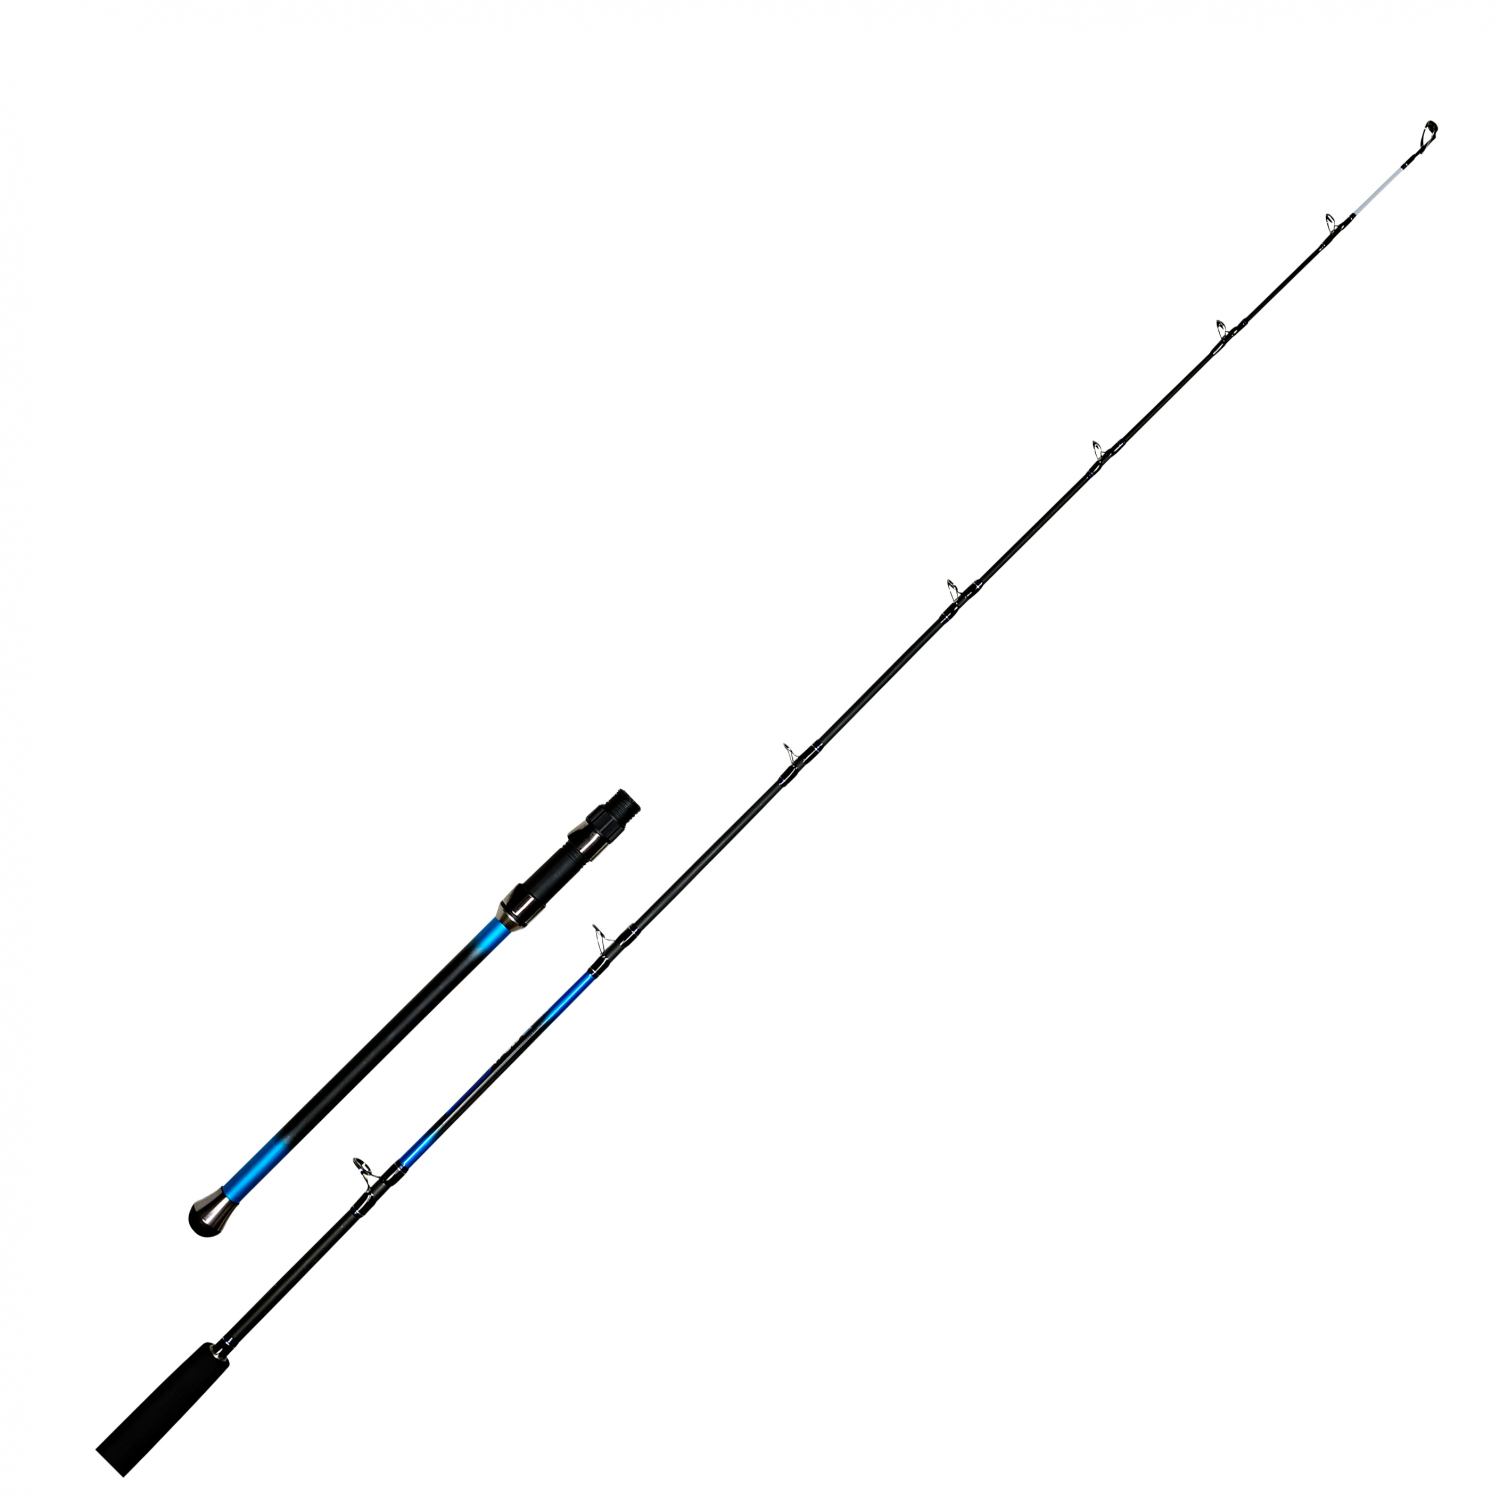 Shakespeare Fishing Rod Sigma Boat at low prices